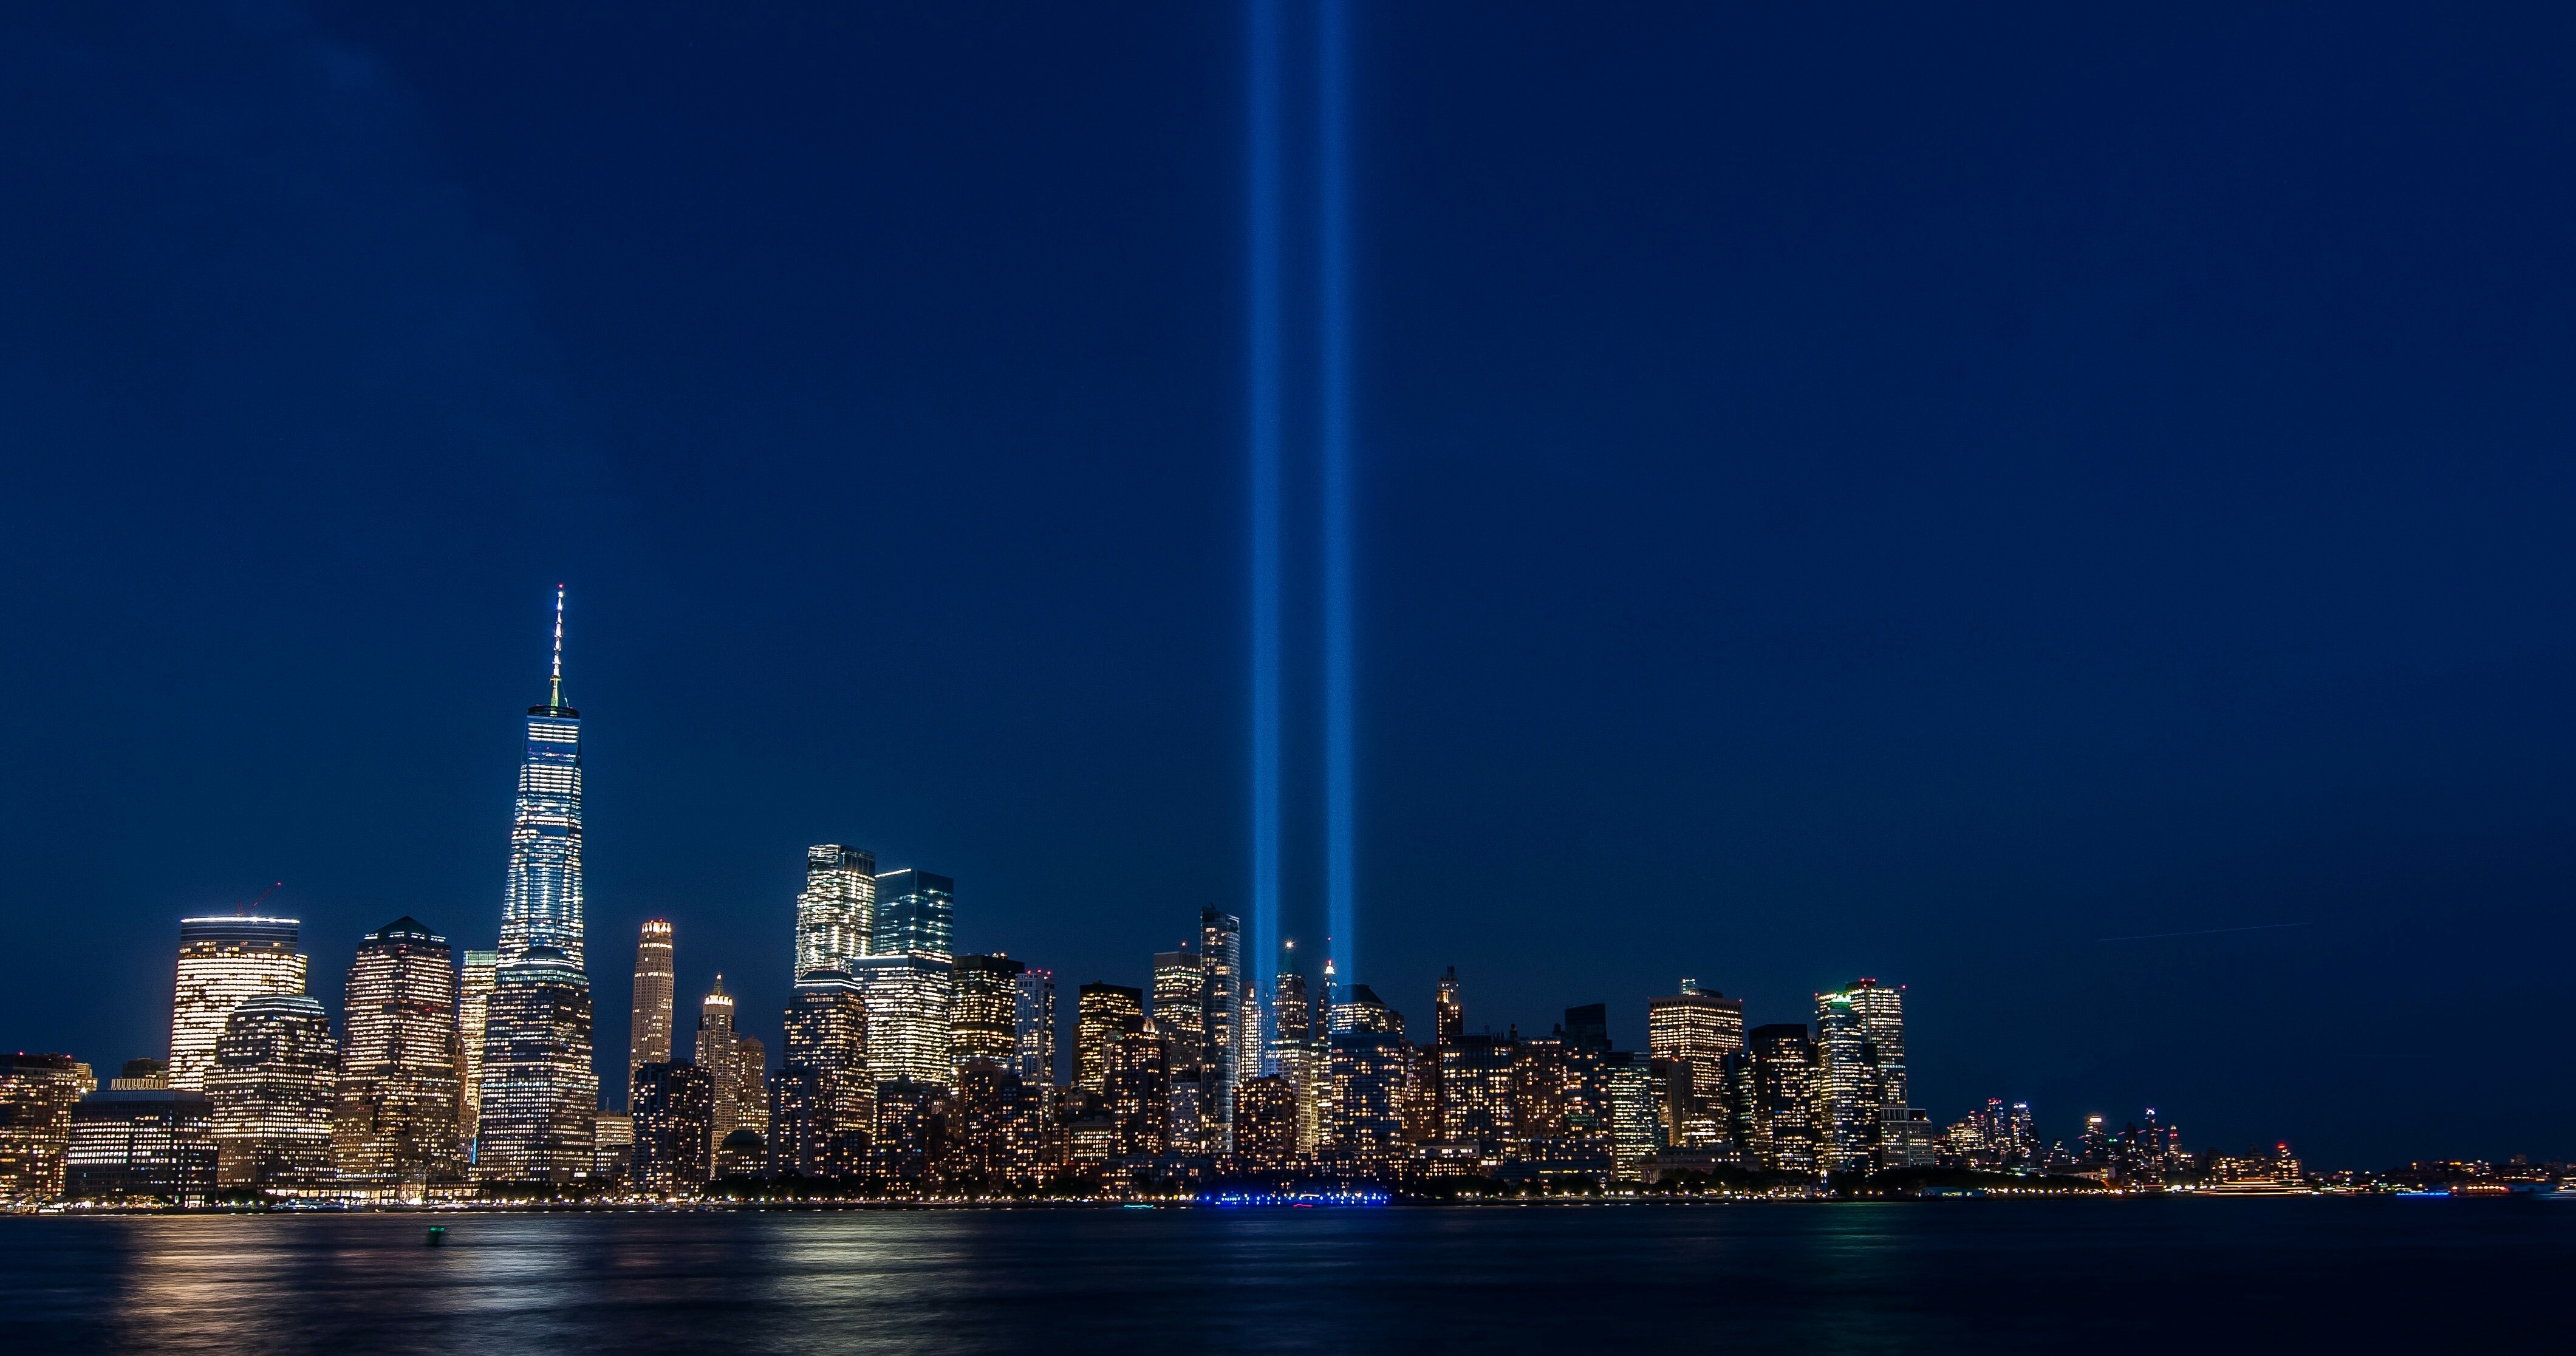 In Remembrance of 9/11/01